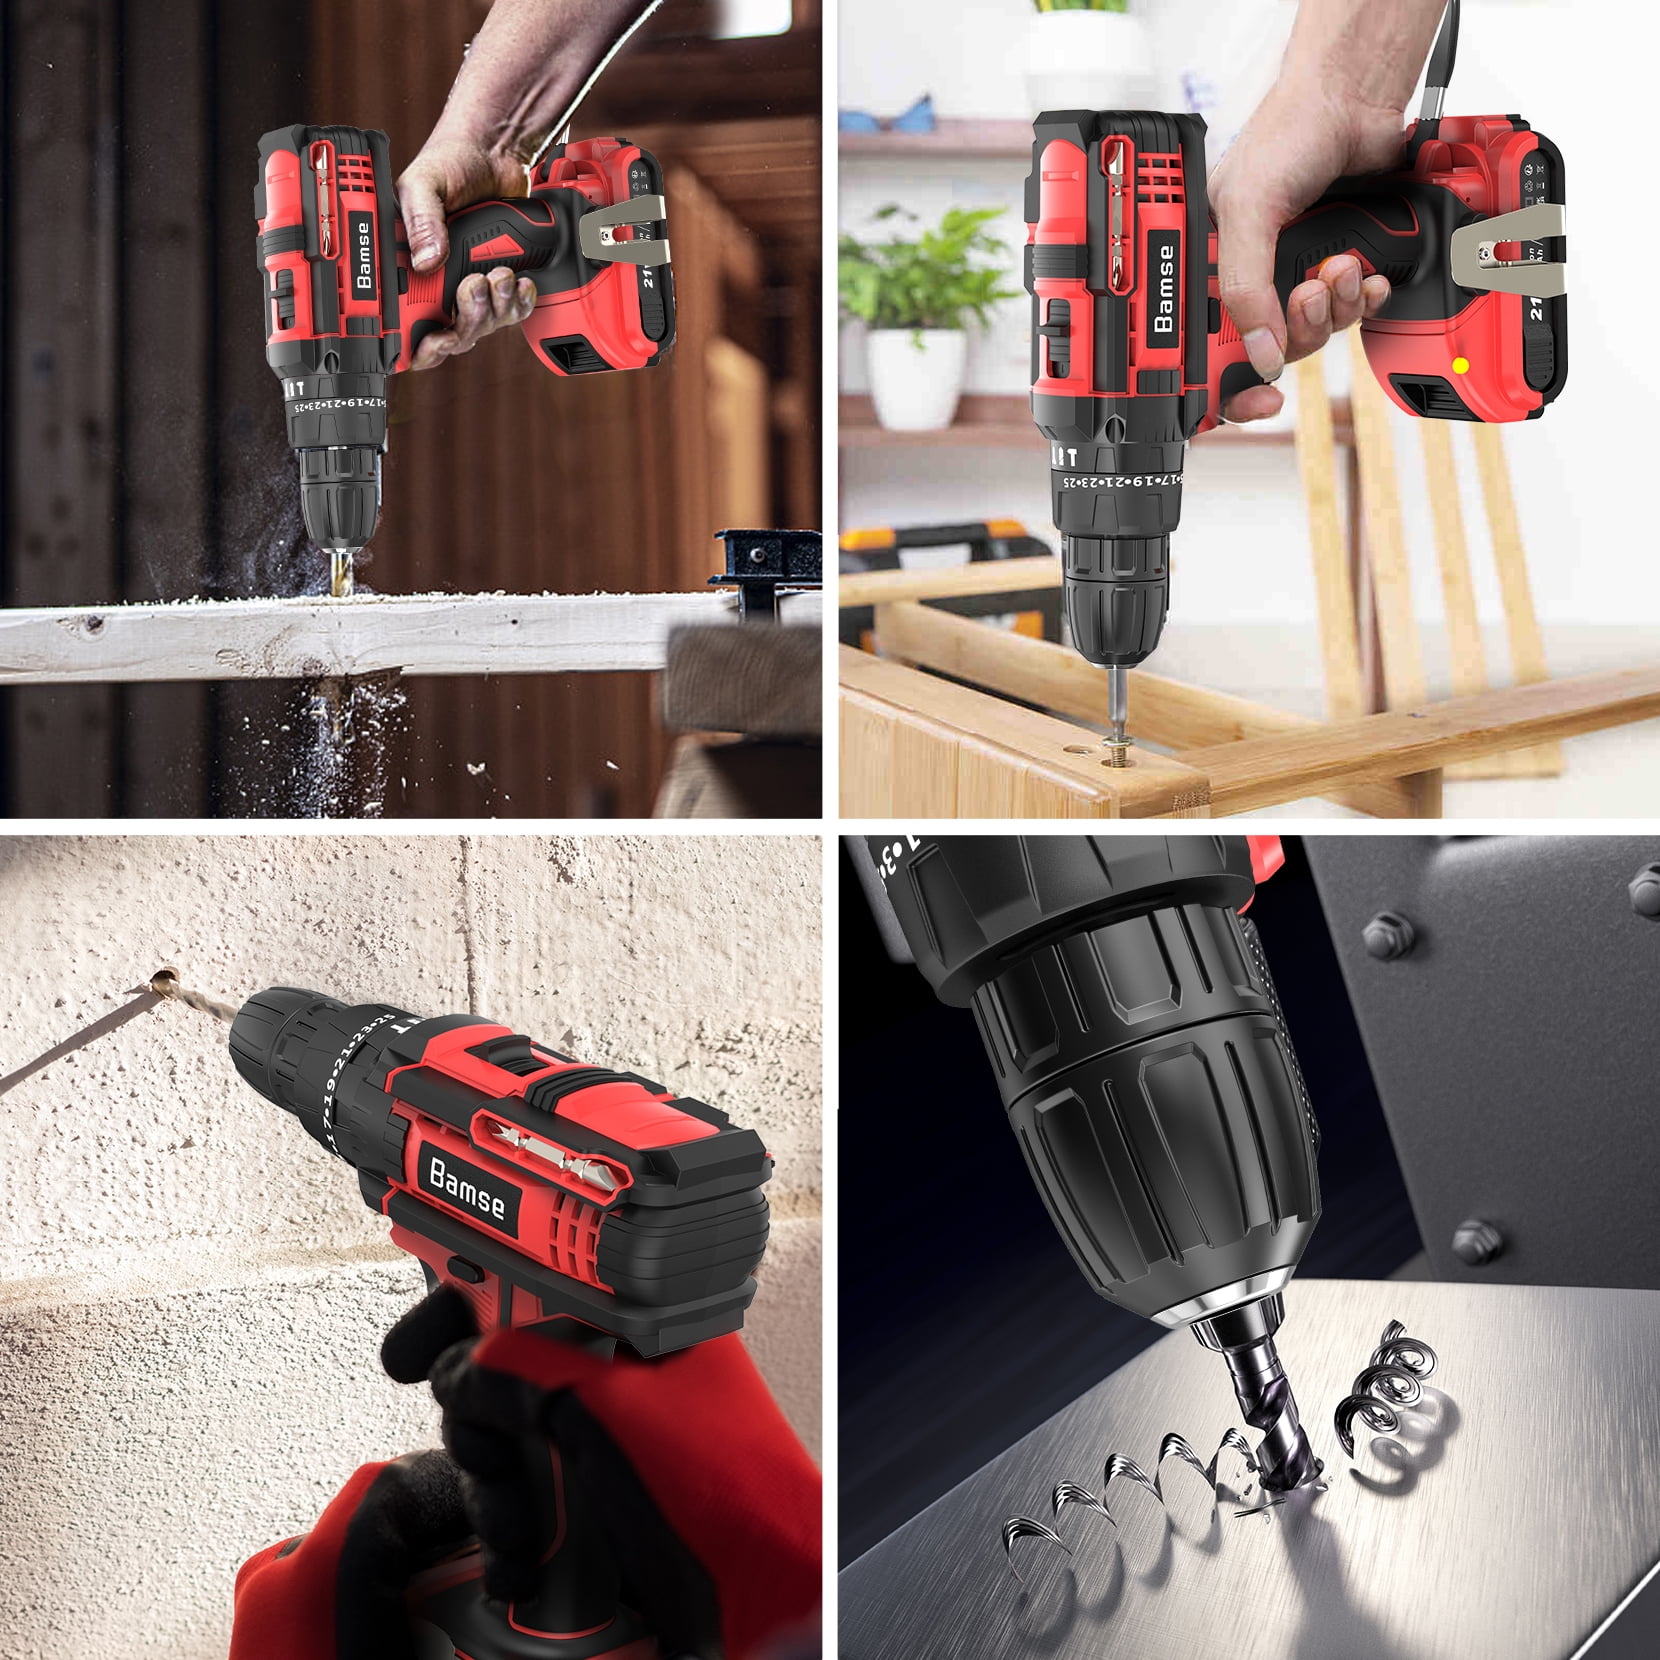 Bamse 12V Cordless Drill with Battery and Charger Power Mini Drill 18+1  Torque, 3/8 Chuck, 30Nm Electric Drill and Accessories 